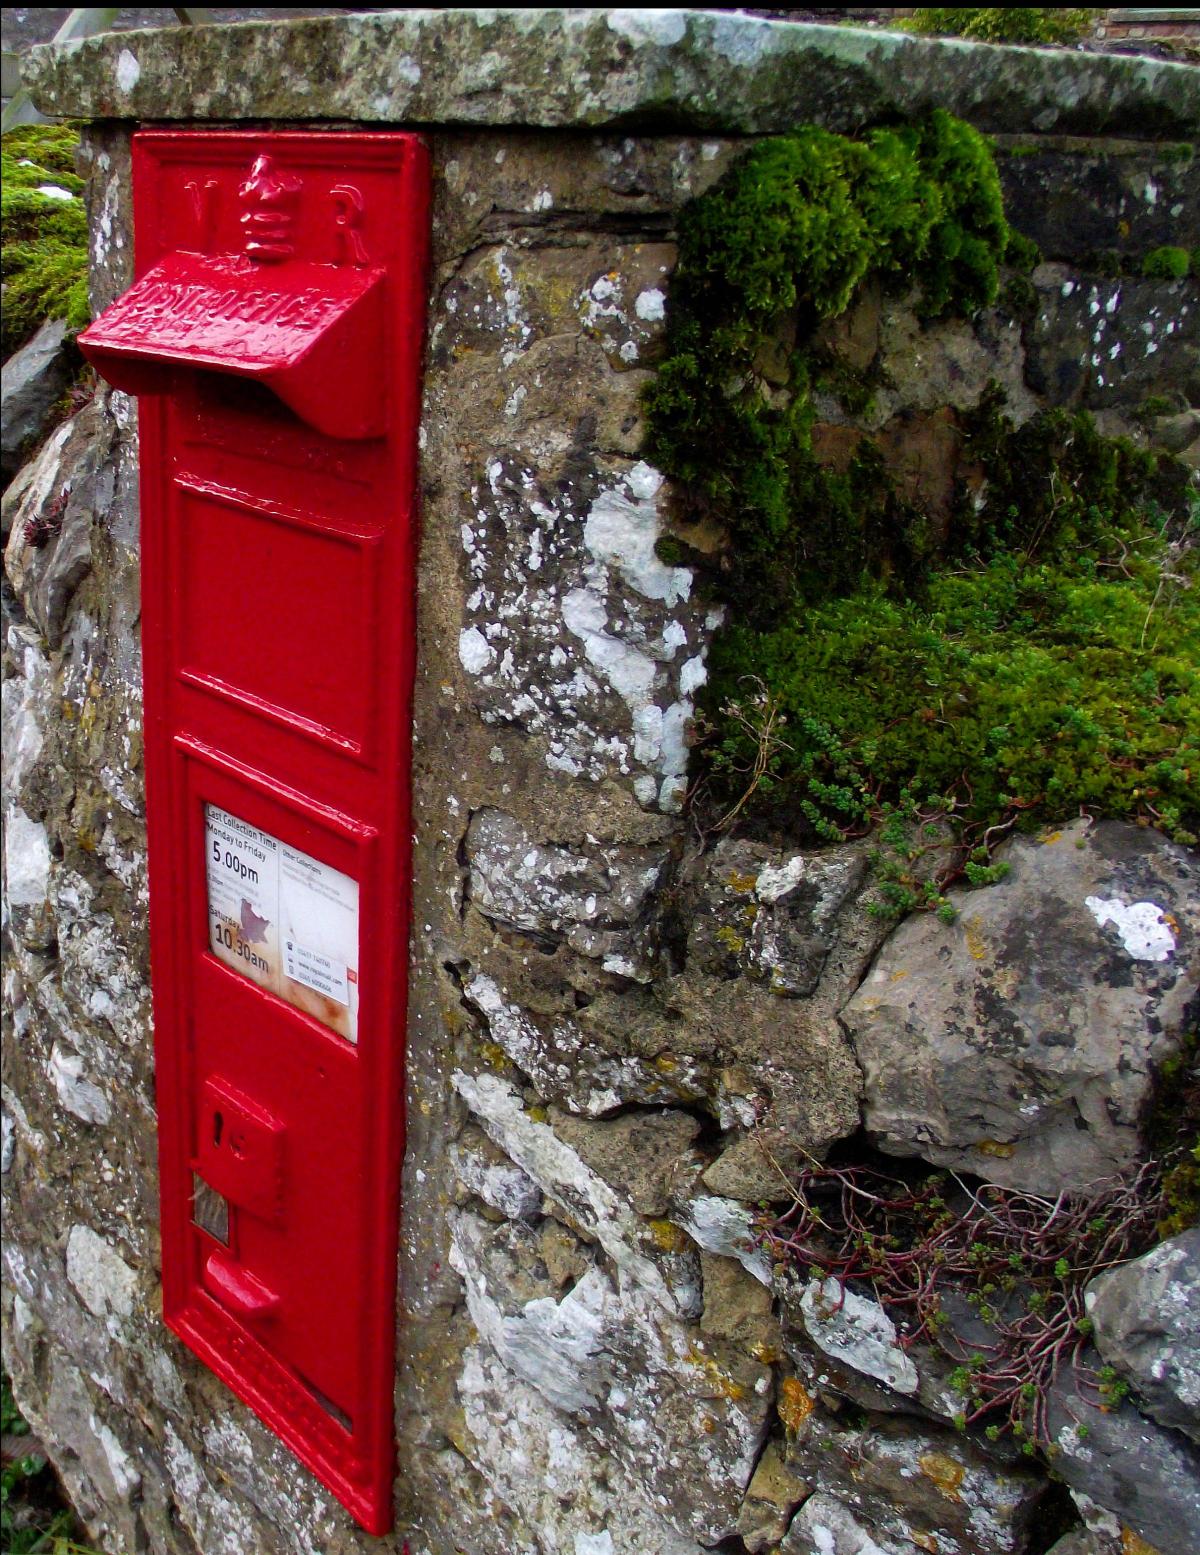 Dave Milburn of Stockton-on-Tees calls this photograph of a Victorian postbox in a garden Wall in Castle Bolton "mail in stone"